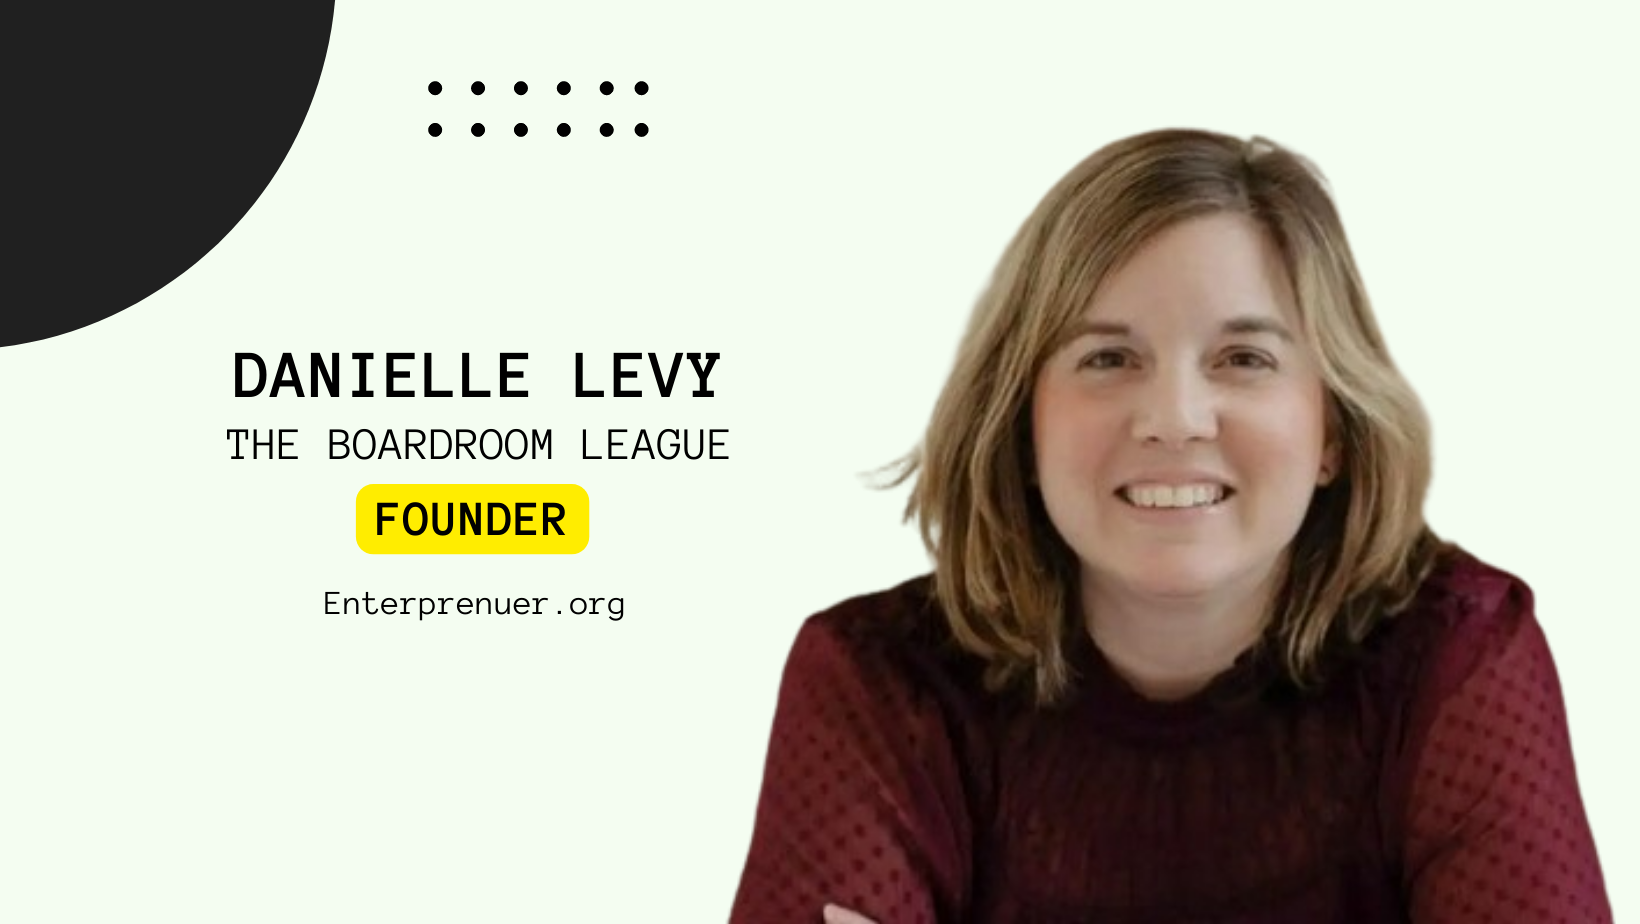 Meet Danielle Levy, Founder of The Boardroom League